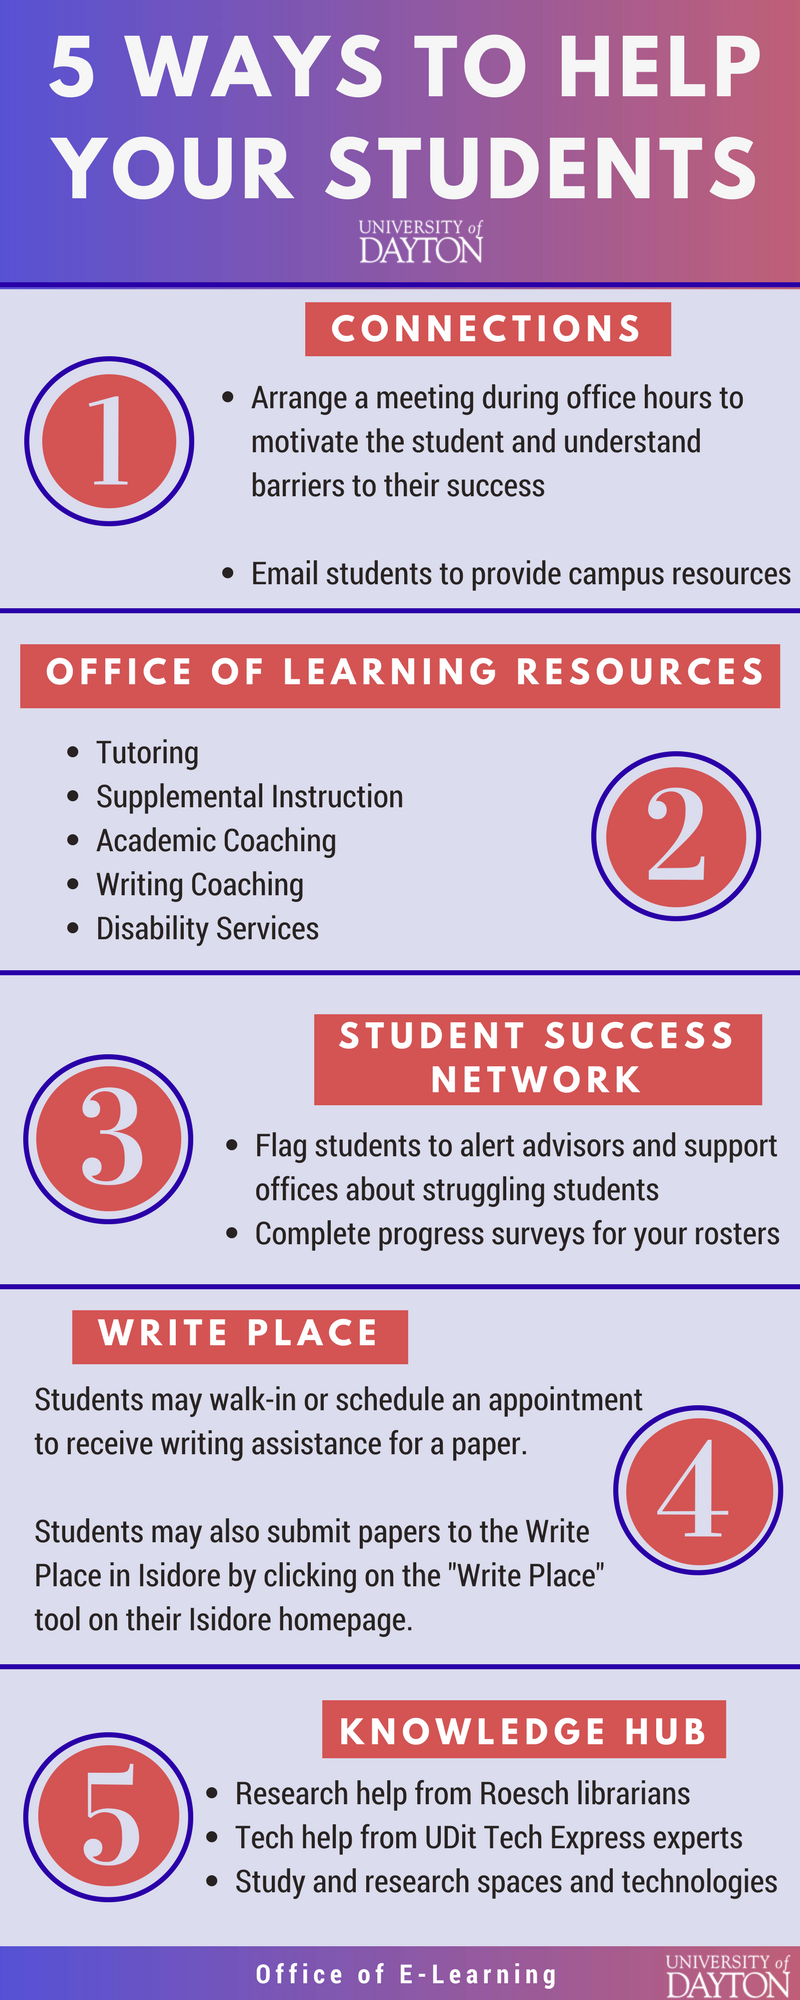 5 Ways to Help Your Students. 1: Connections. Arrange a meeting during office hours to motivate the student and understand barriers to their success. Email students to provide campus resources. 2. Office of Learning Resources. They offer tutoring, supplemental instruction, academic coaching, writing coaching, and disability services. 3. Student Success Network. Flag students to alert advisors and support offices about struggling students. Complete progress surveys for your rosters. 4. Write Place. Students may walk-in or schedule an appointment to receive writing assistance for a paper. Students may also submit papers to the Write Place in Isidore by clicking on the "Write Place" tool on their Isidore homepage. 5. Knowledge Hub. Research help from Roesch librarians. Tech help from UDit Tech Express experts. Study and research spaces and technologies. 